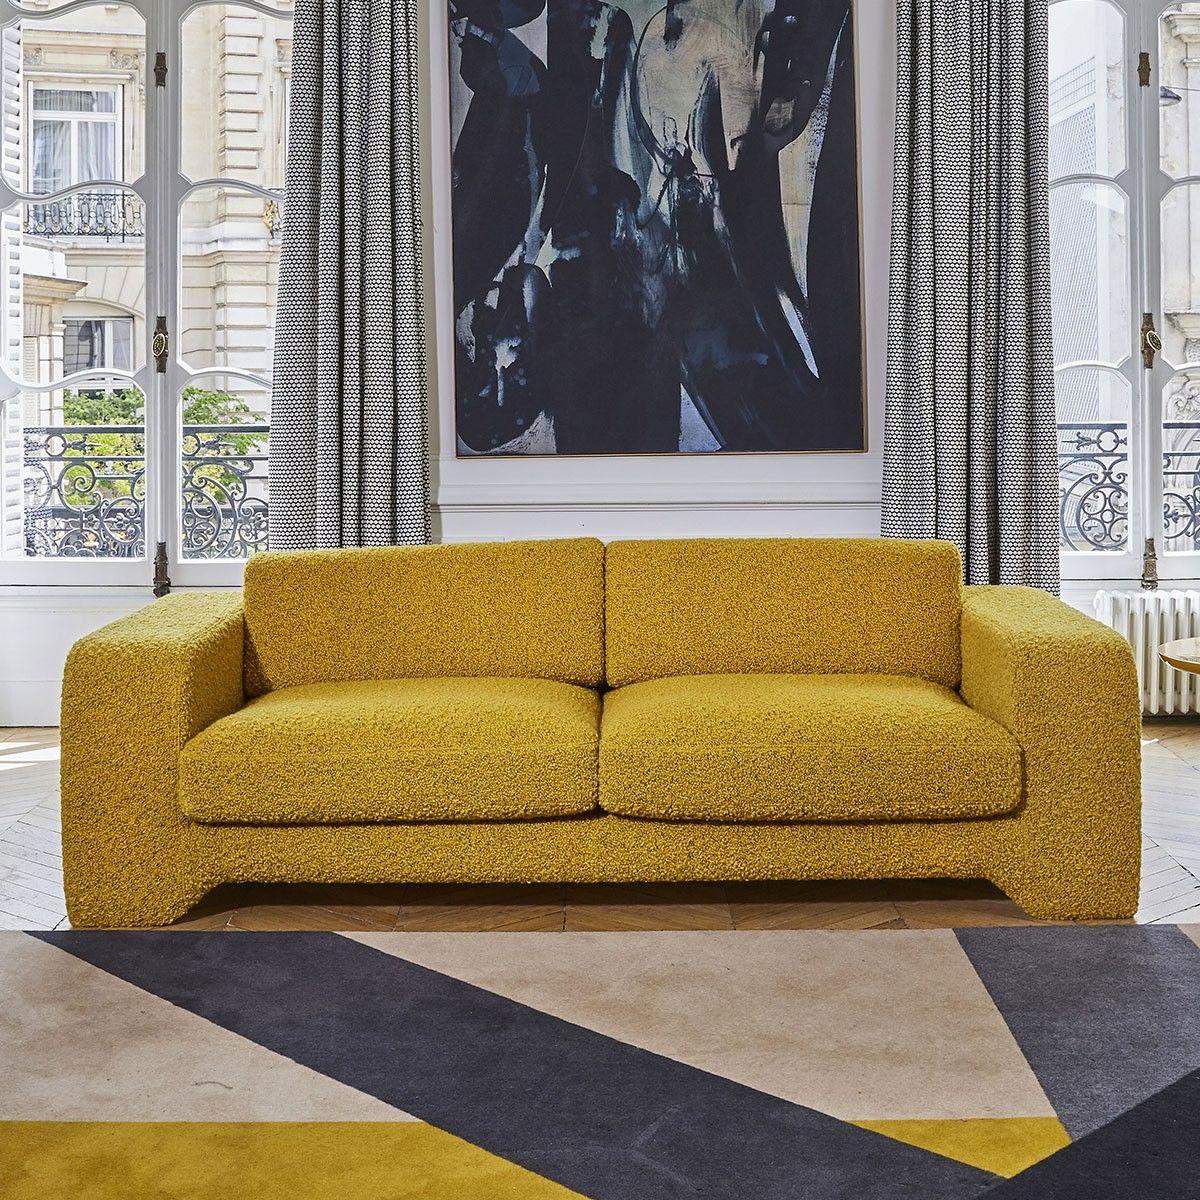 Popus Editions Giovanna 3 Seater Sofa in Orange-Red Como Velvet Upholstery.

Giovanna is a sofa with a strong profile. A sober, plush line, with this famous detail that changes everything, so as not to forget its strength of character and this